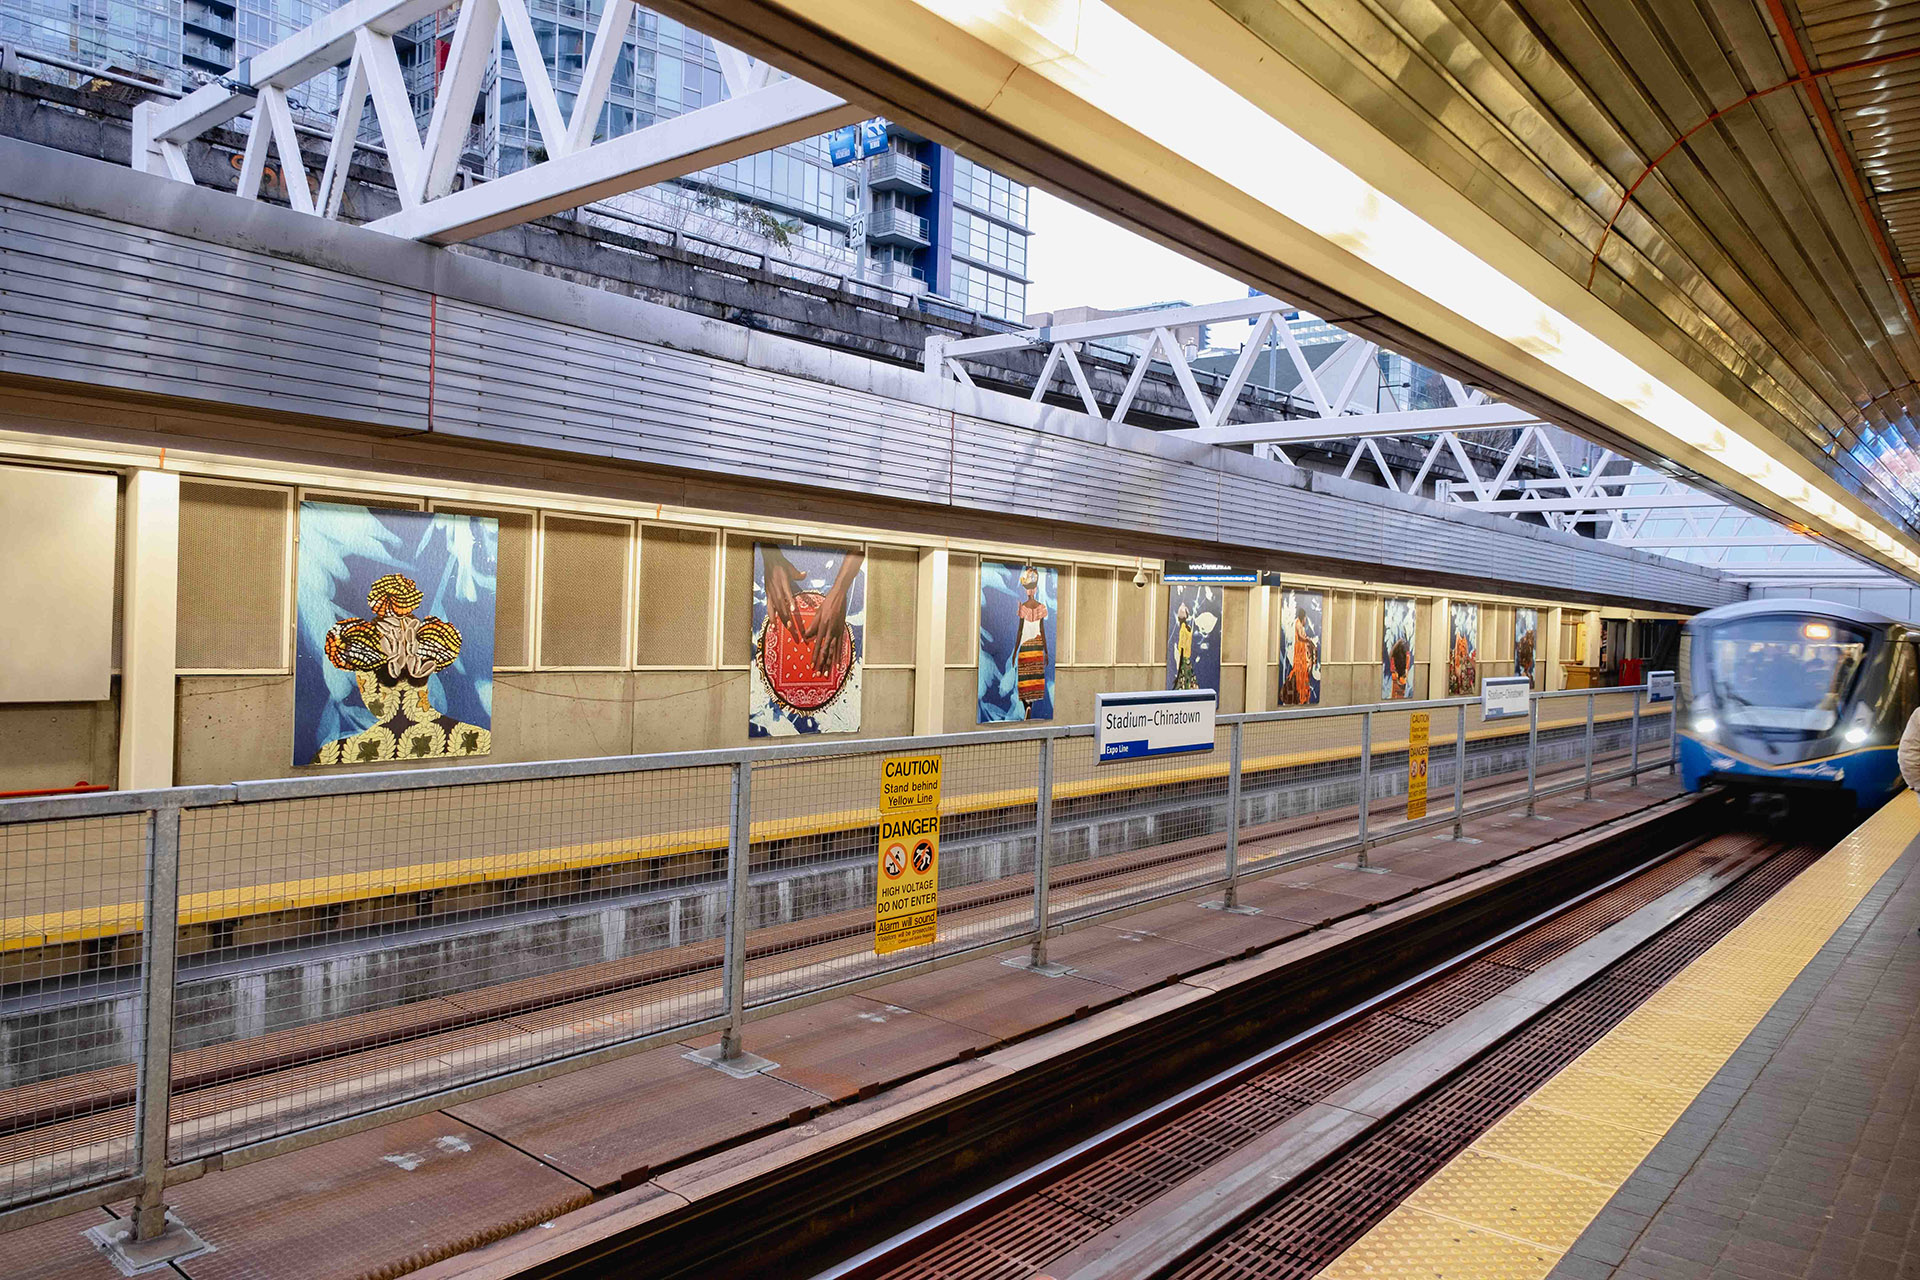 'Woven Consciousness' by Natoya Ellis is a series of eight artworks displayed at Stadium–Chinatown Station